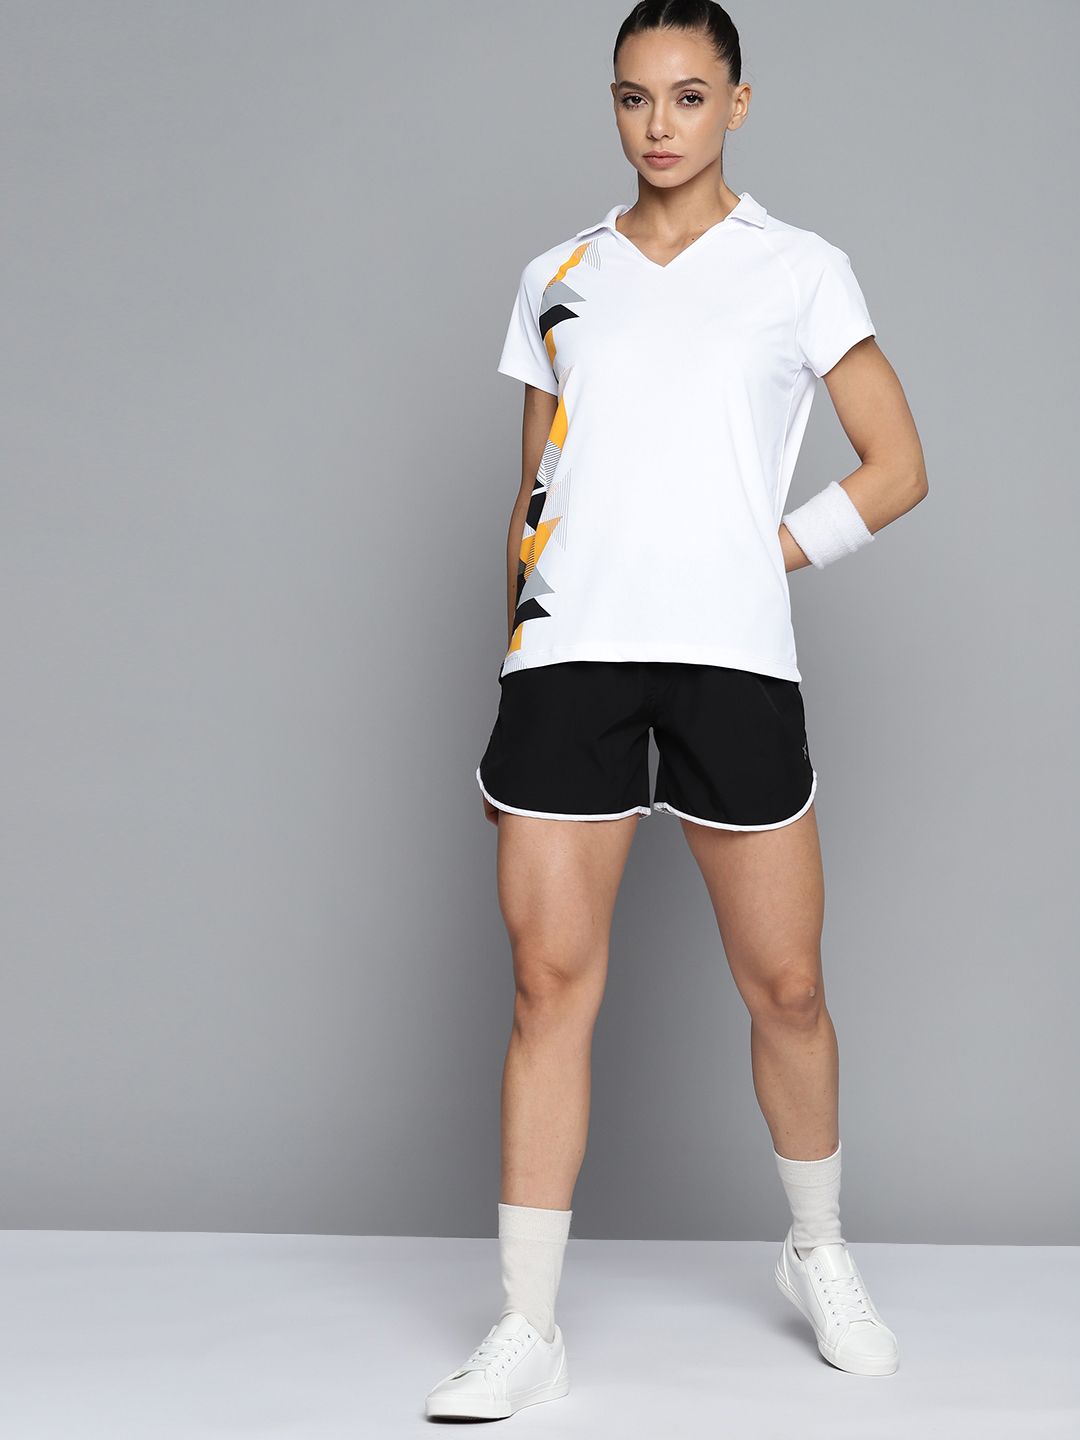 HRX By Hrithik Roshan Racketsport Women Optic White Rapid-Dry Abstract T-shirt Price in India